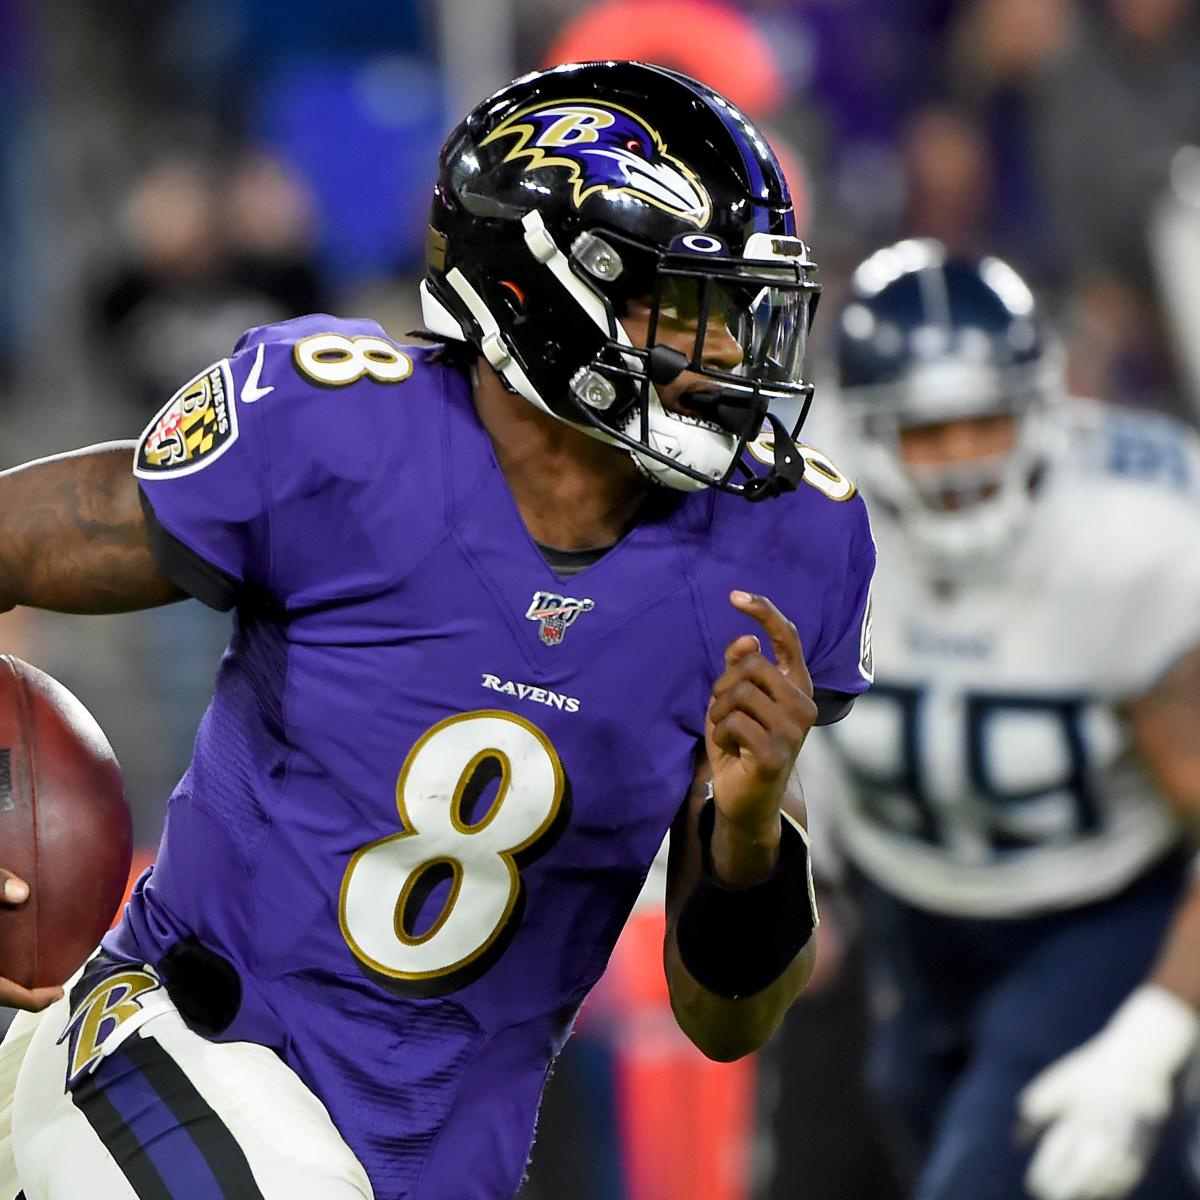 Lamar Jackson to be cover athlete for Madden 21